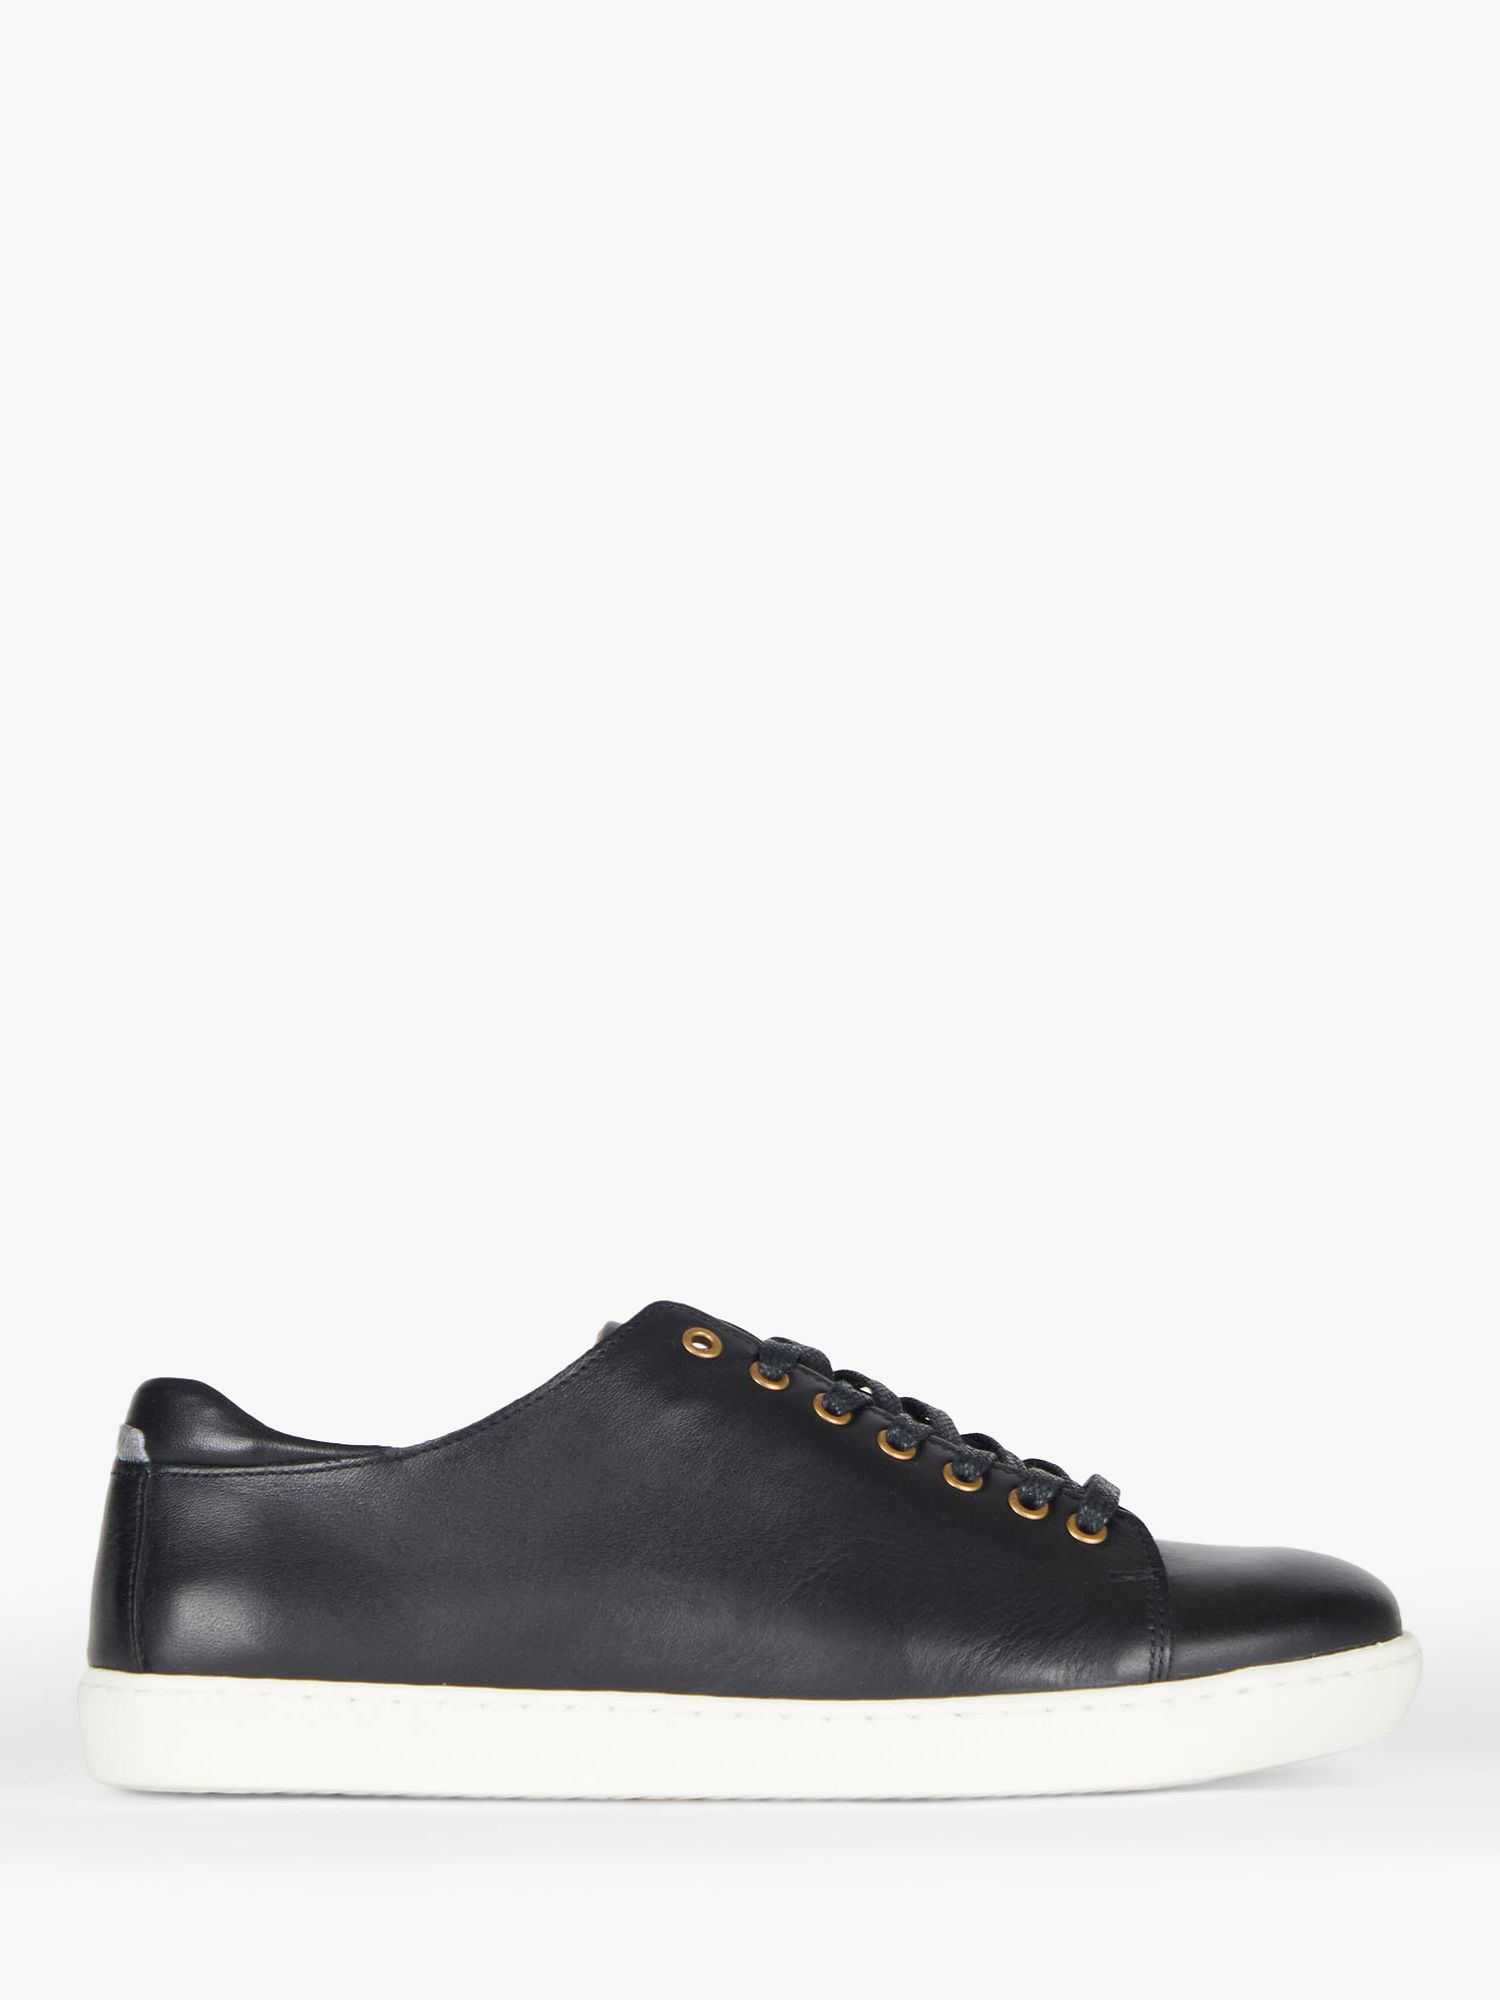 Barbour Hallie Leather Trainers, Black at John Lewis & Partners